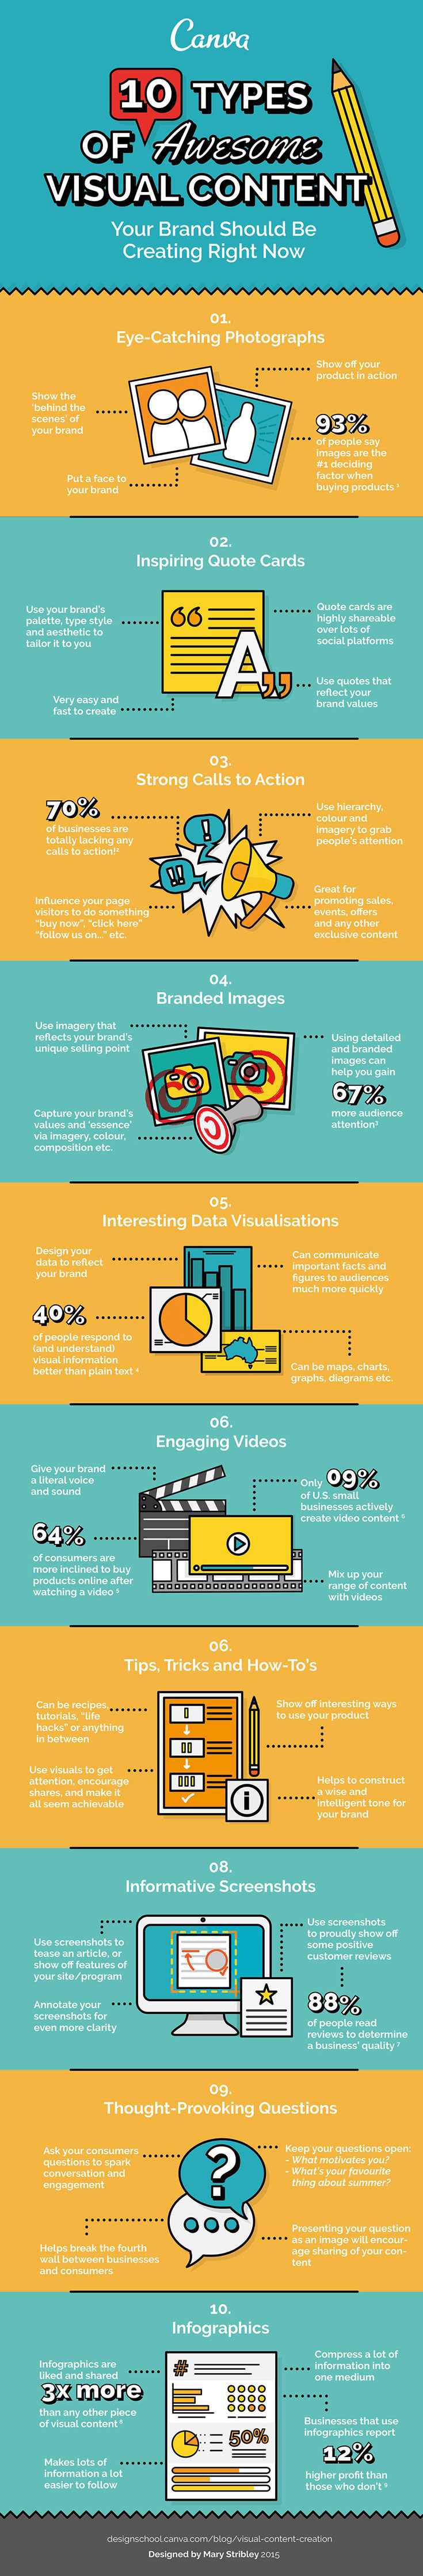 10 types of visual content infographic